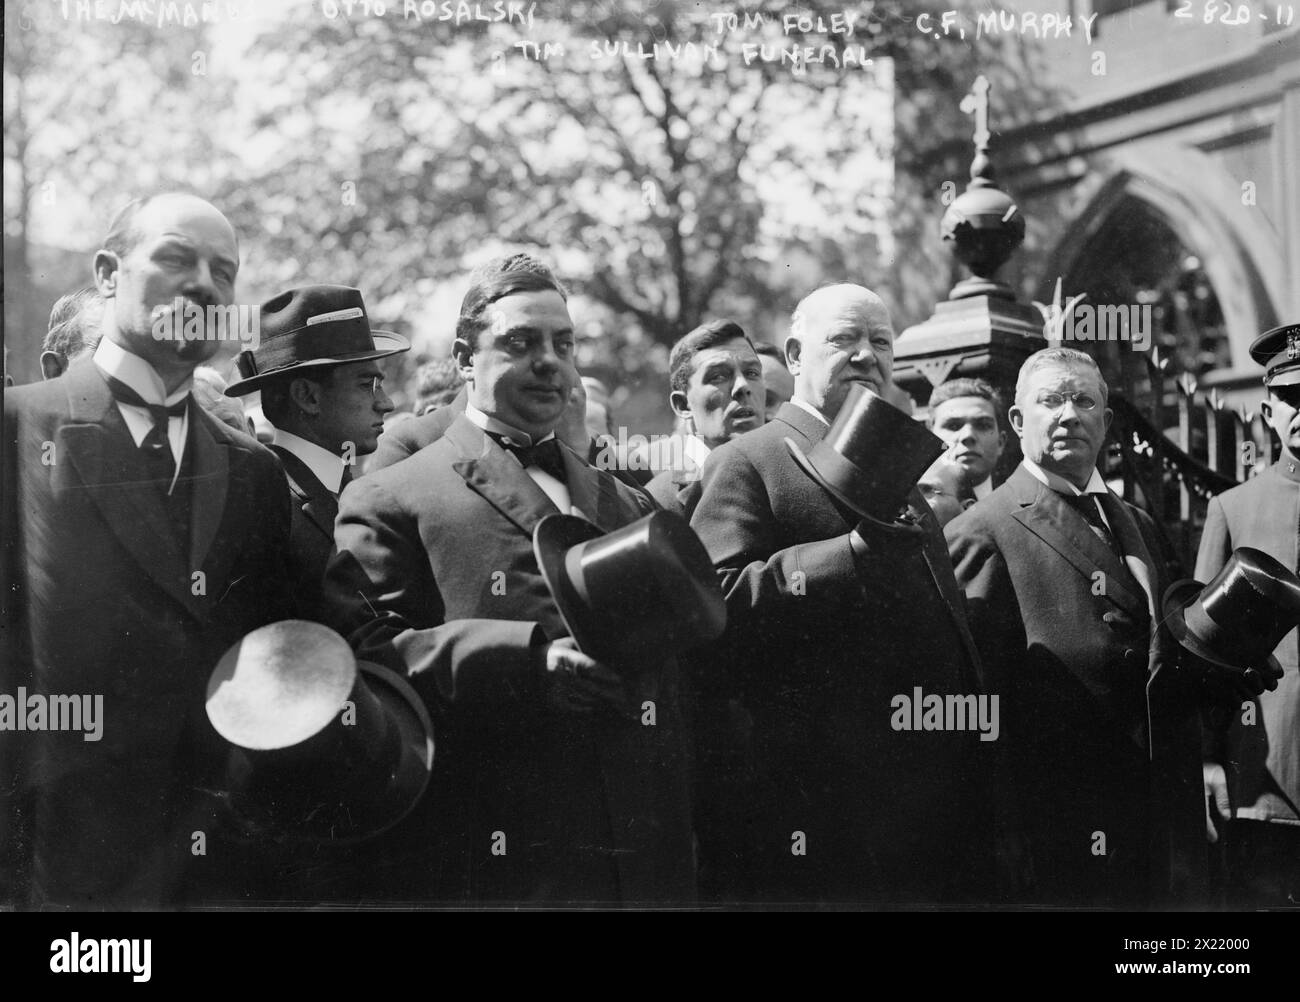 The McManus, Otto Rosalsky, Tom Foley, C.F. Murphy, Tim Sullivan funeral, 1913. Shows Tammany boss Charles Francis Murphy, Judge Otto Rosalsky, The McManus and Tom Foley who were pall bearers at the funeral for New York Tammany Hall politician Timothy (Big Tim) Daniel Sullivan (1862-1913) which took place at St. Patrick's Old Cathedral, the Bowery, New York City, Sept. 15, 1913. Stock Photo